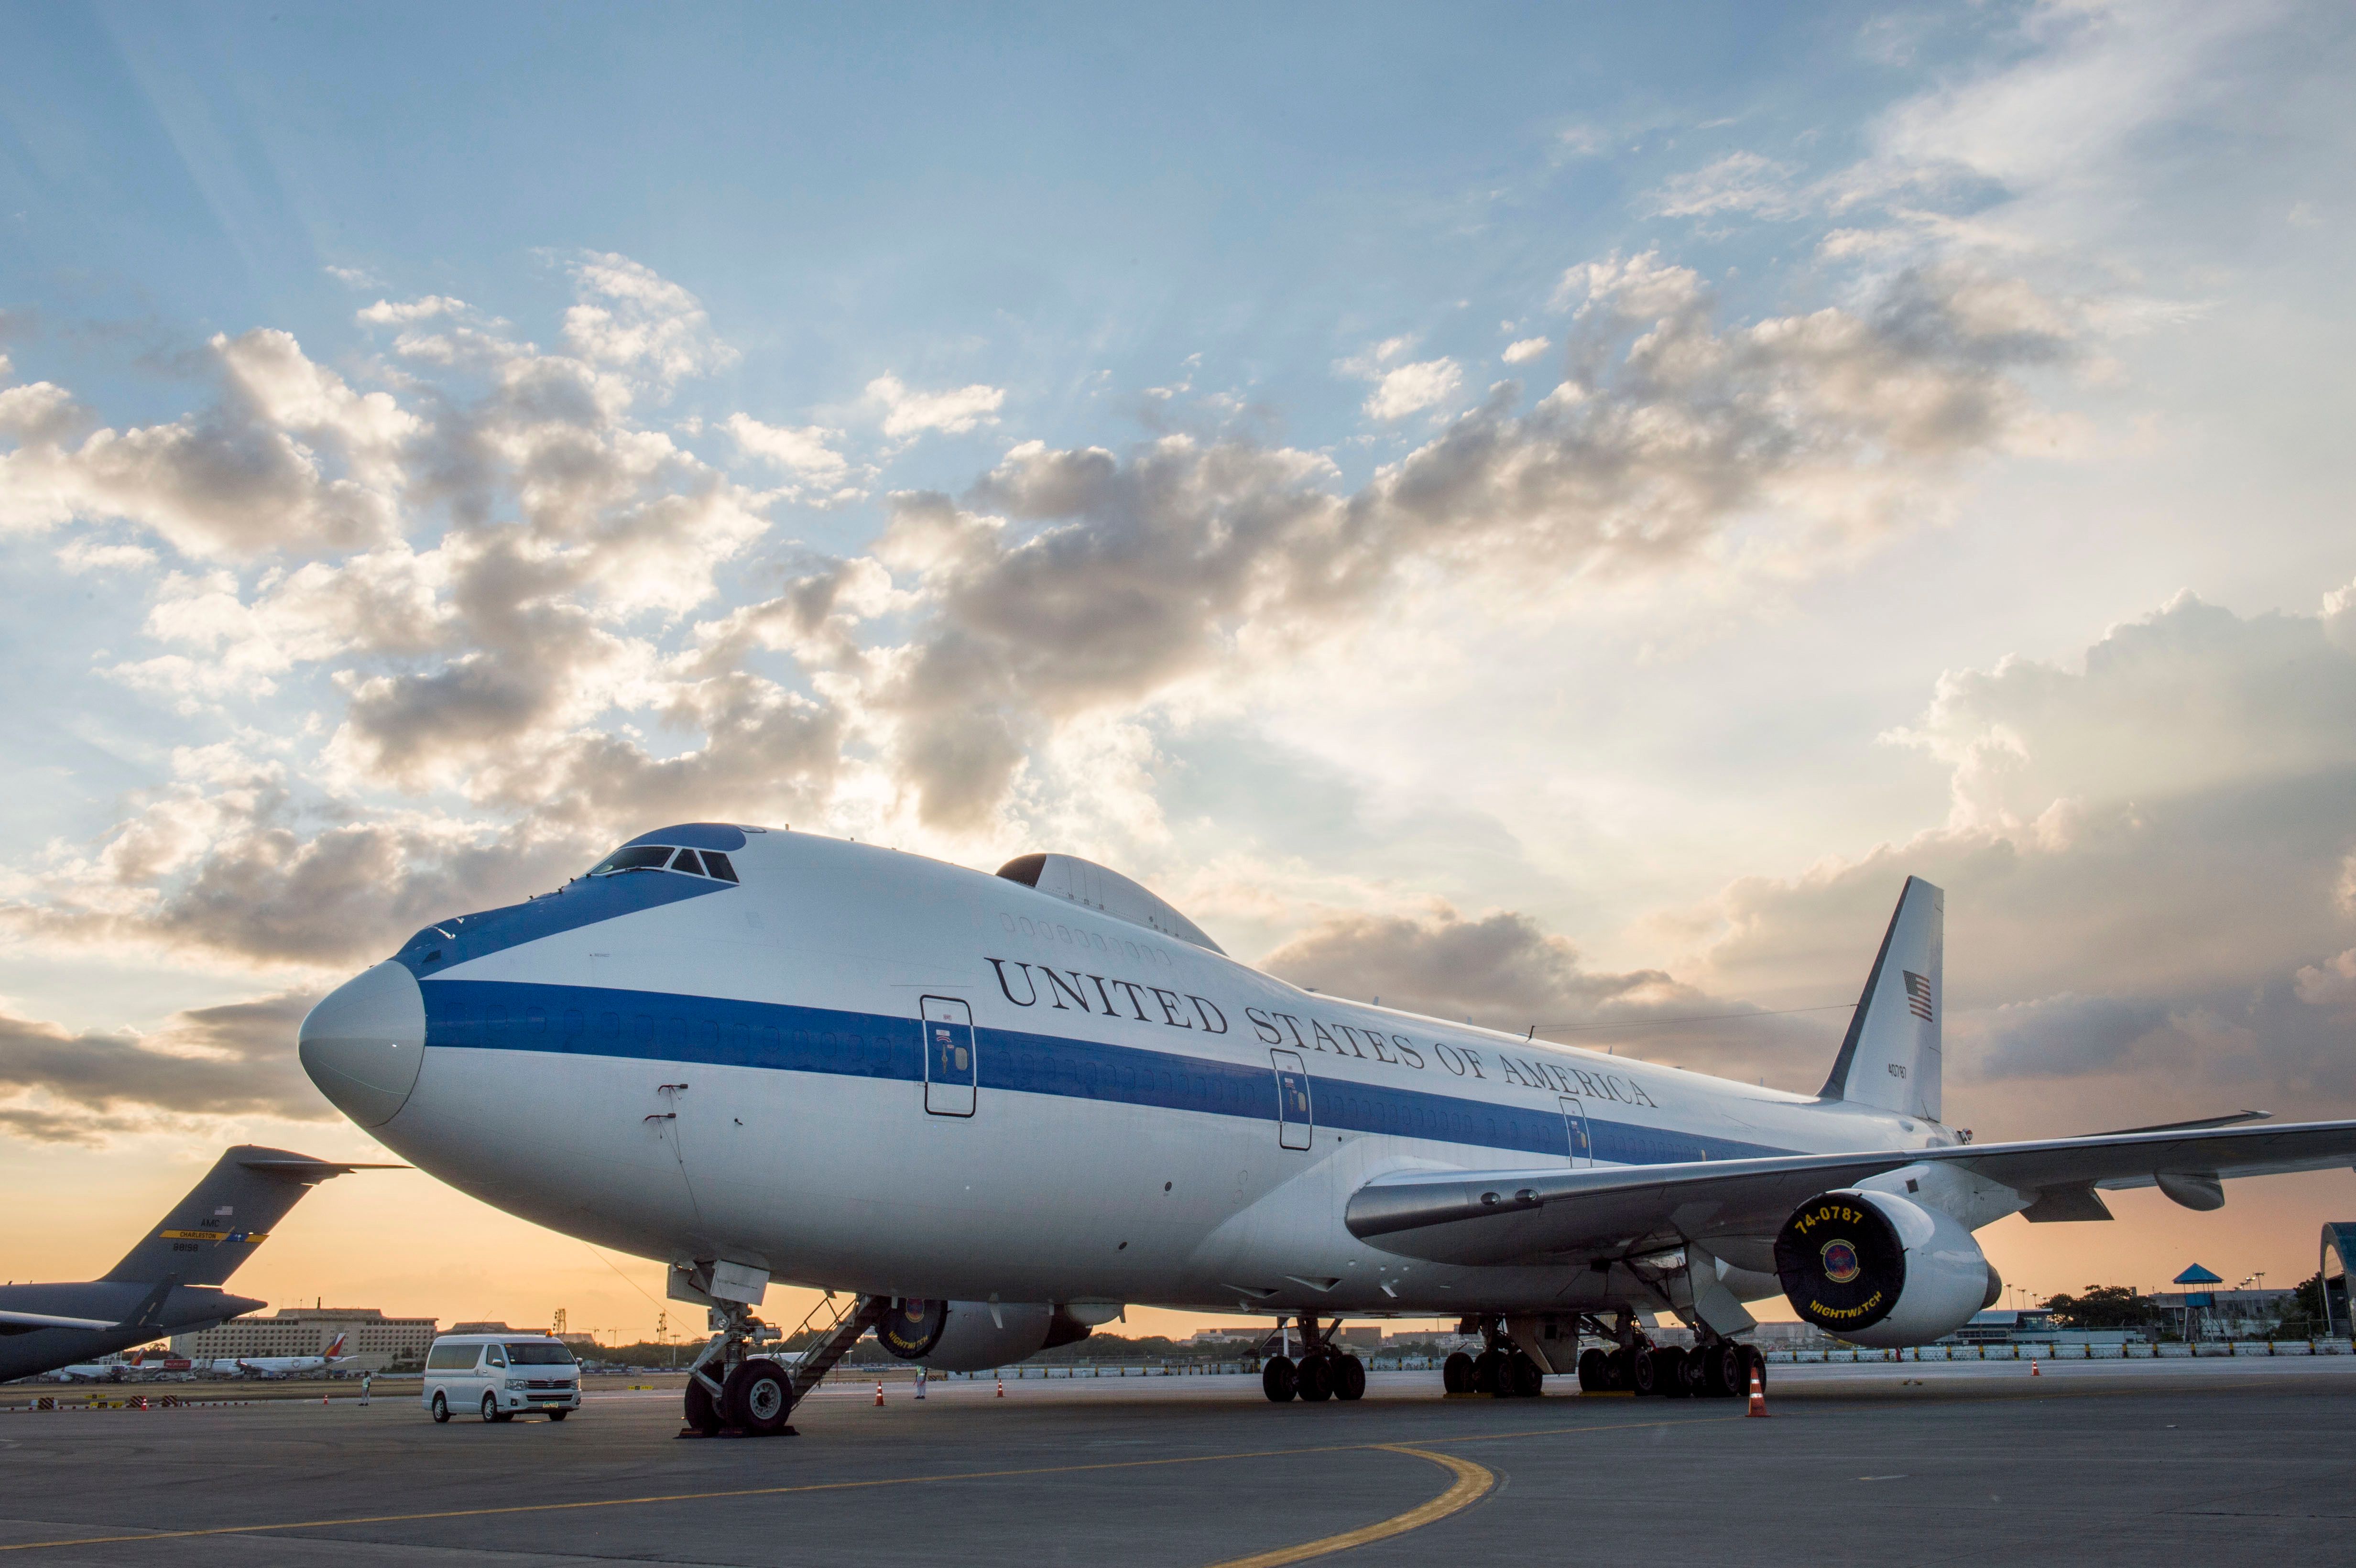 The E-4B Doomsday plane parked at an airport at sunset.